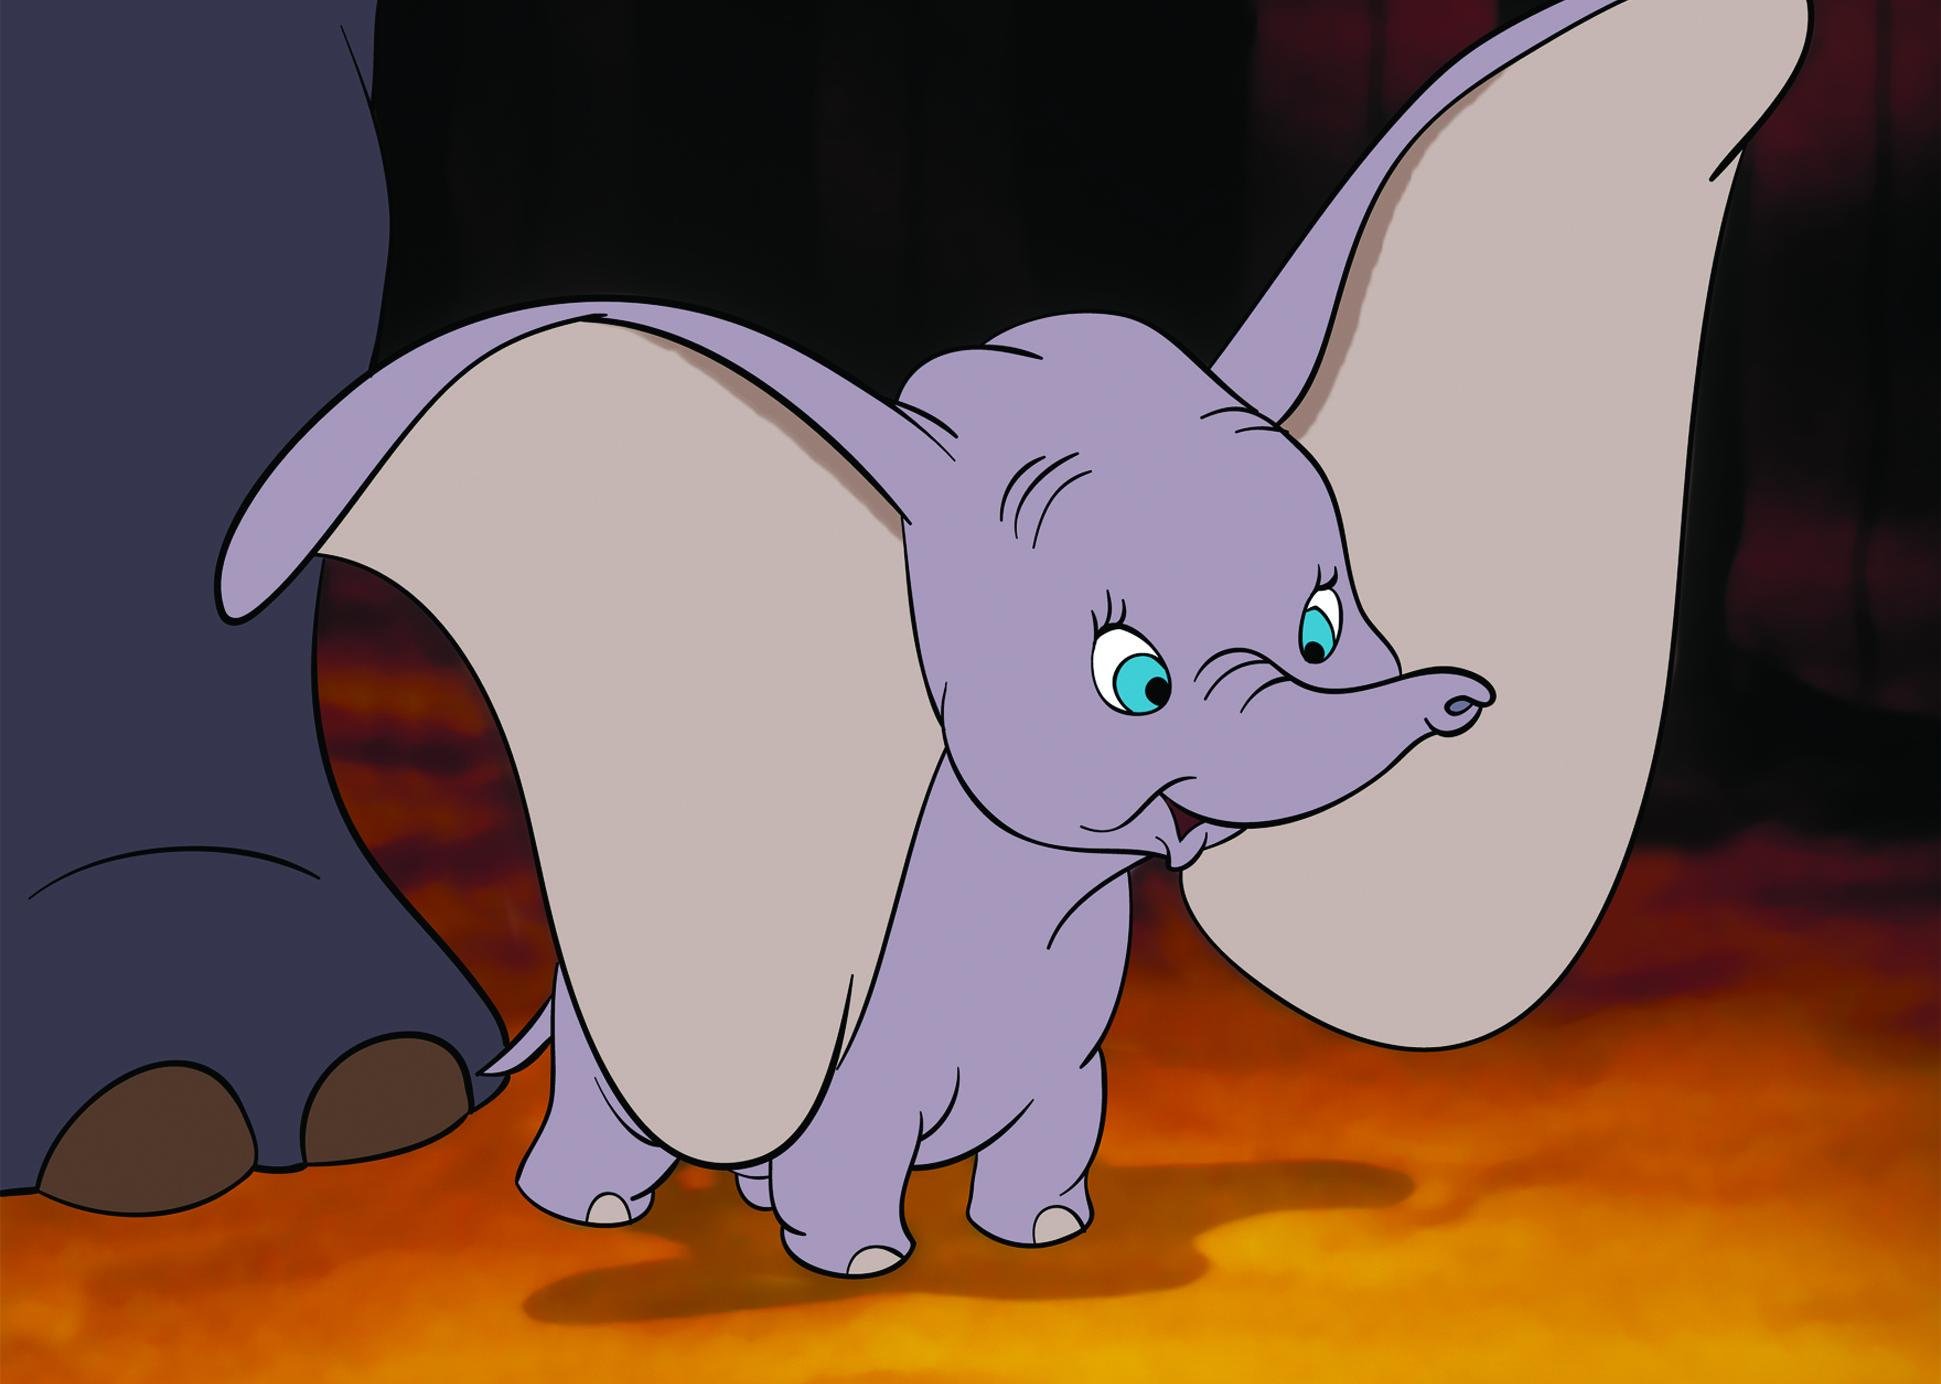 A cartoon of a smiling baby elephant, Dumbo, with huge ears.